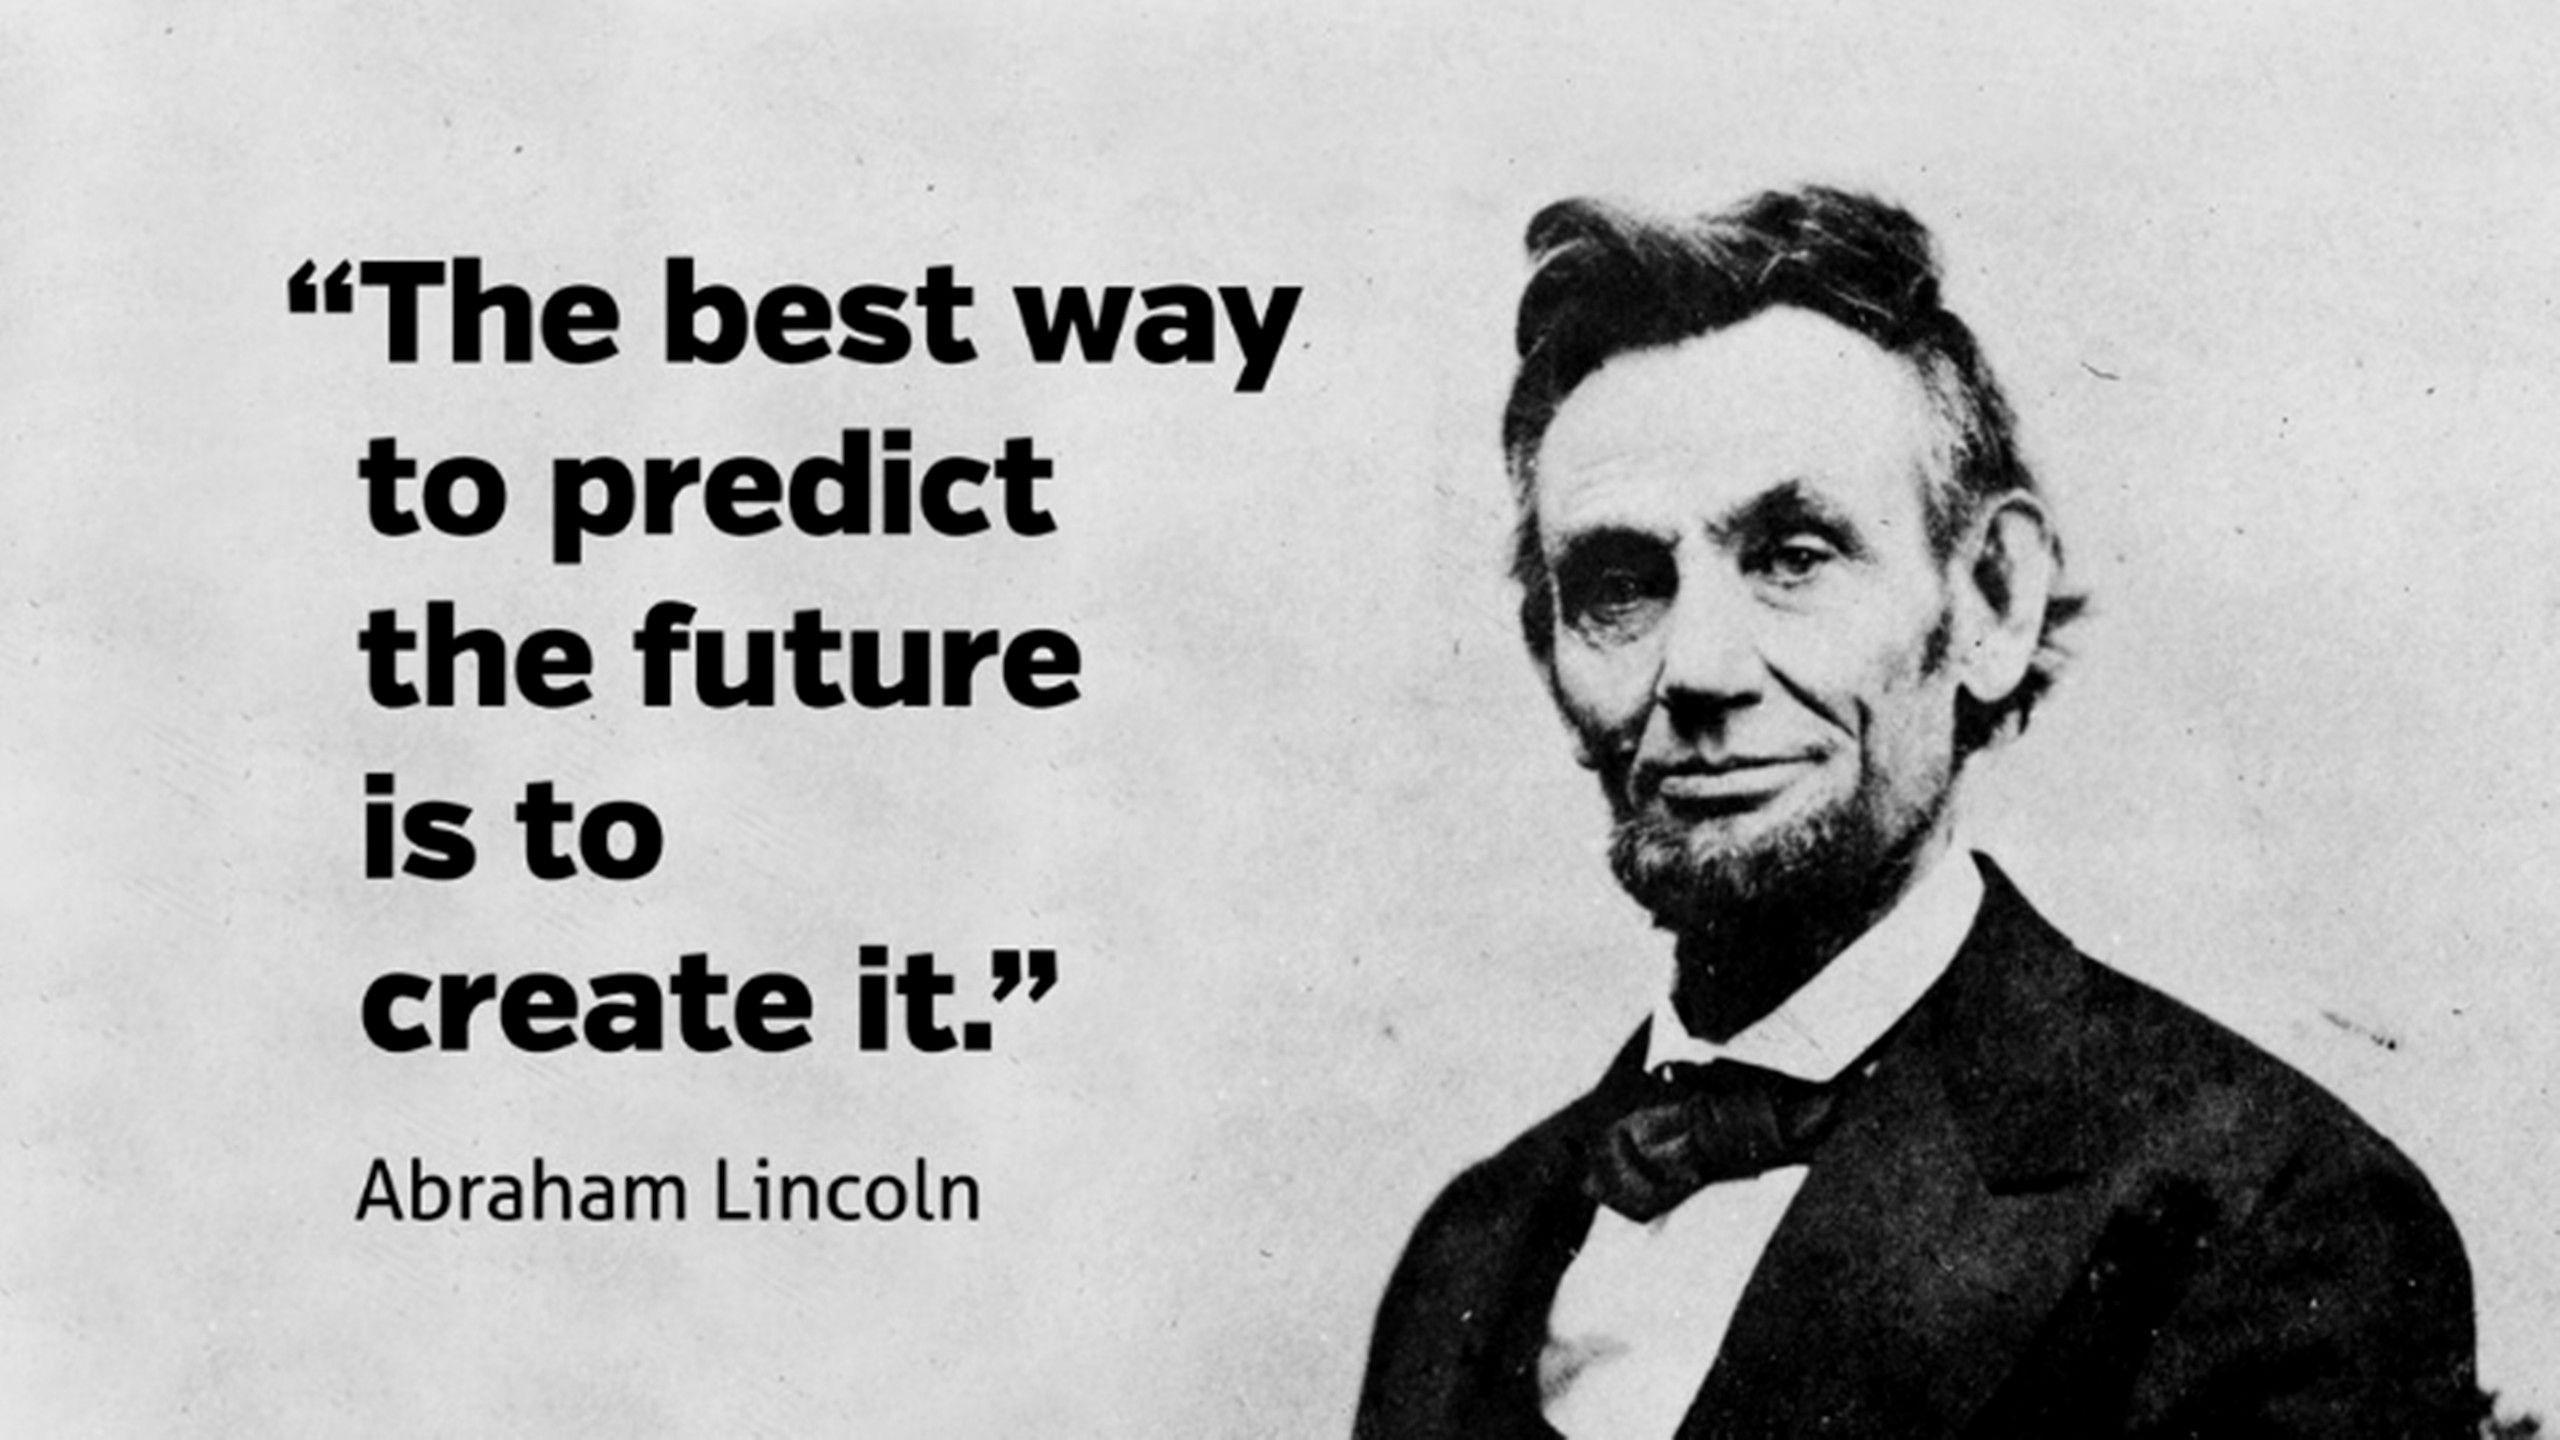 Abraham Lincoln Popular HD Quote about Creating Future. Free